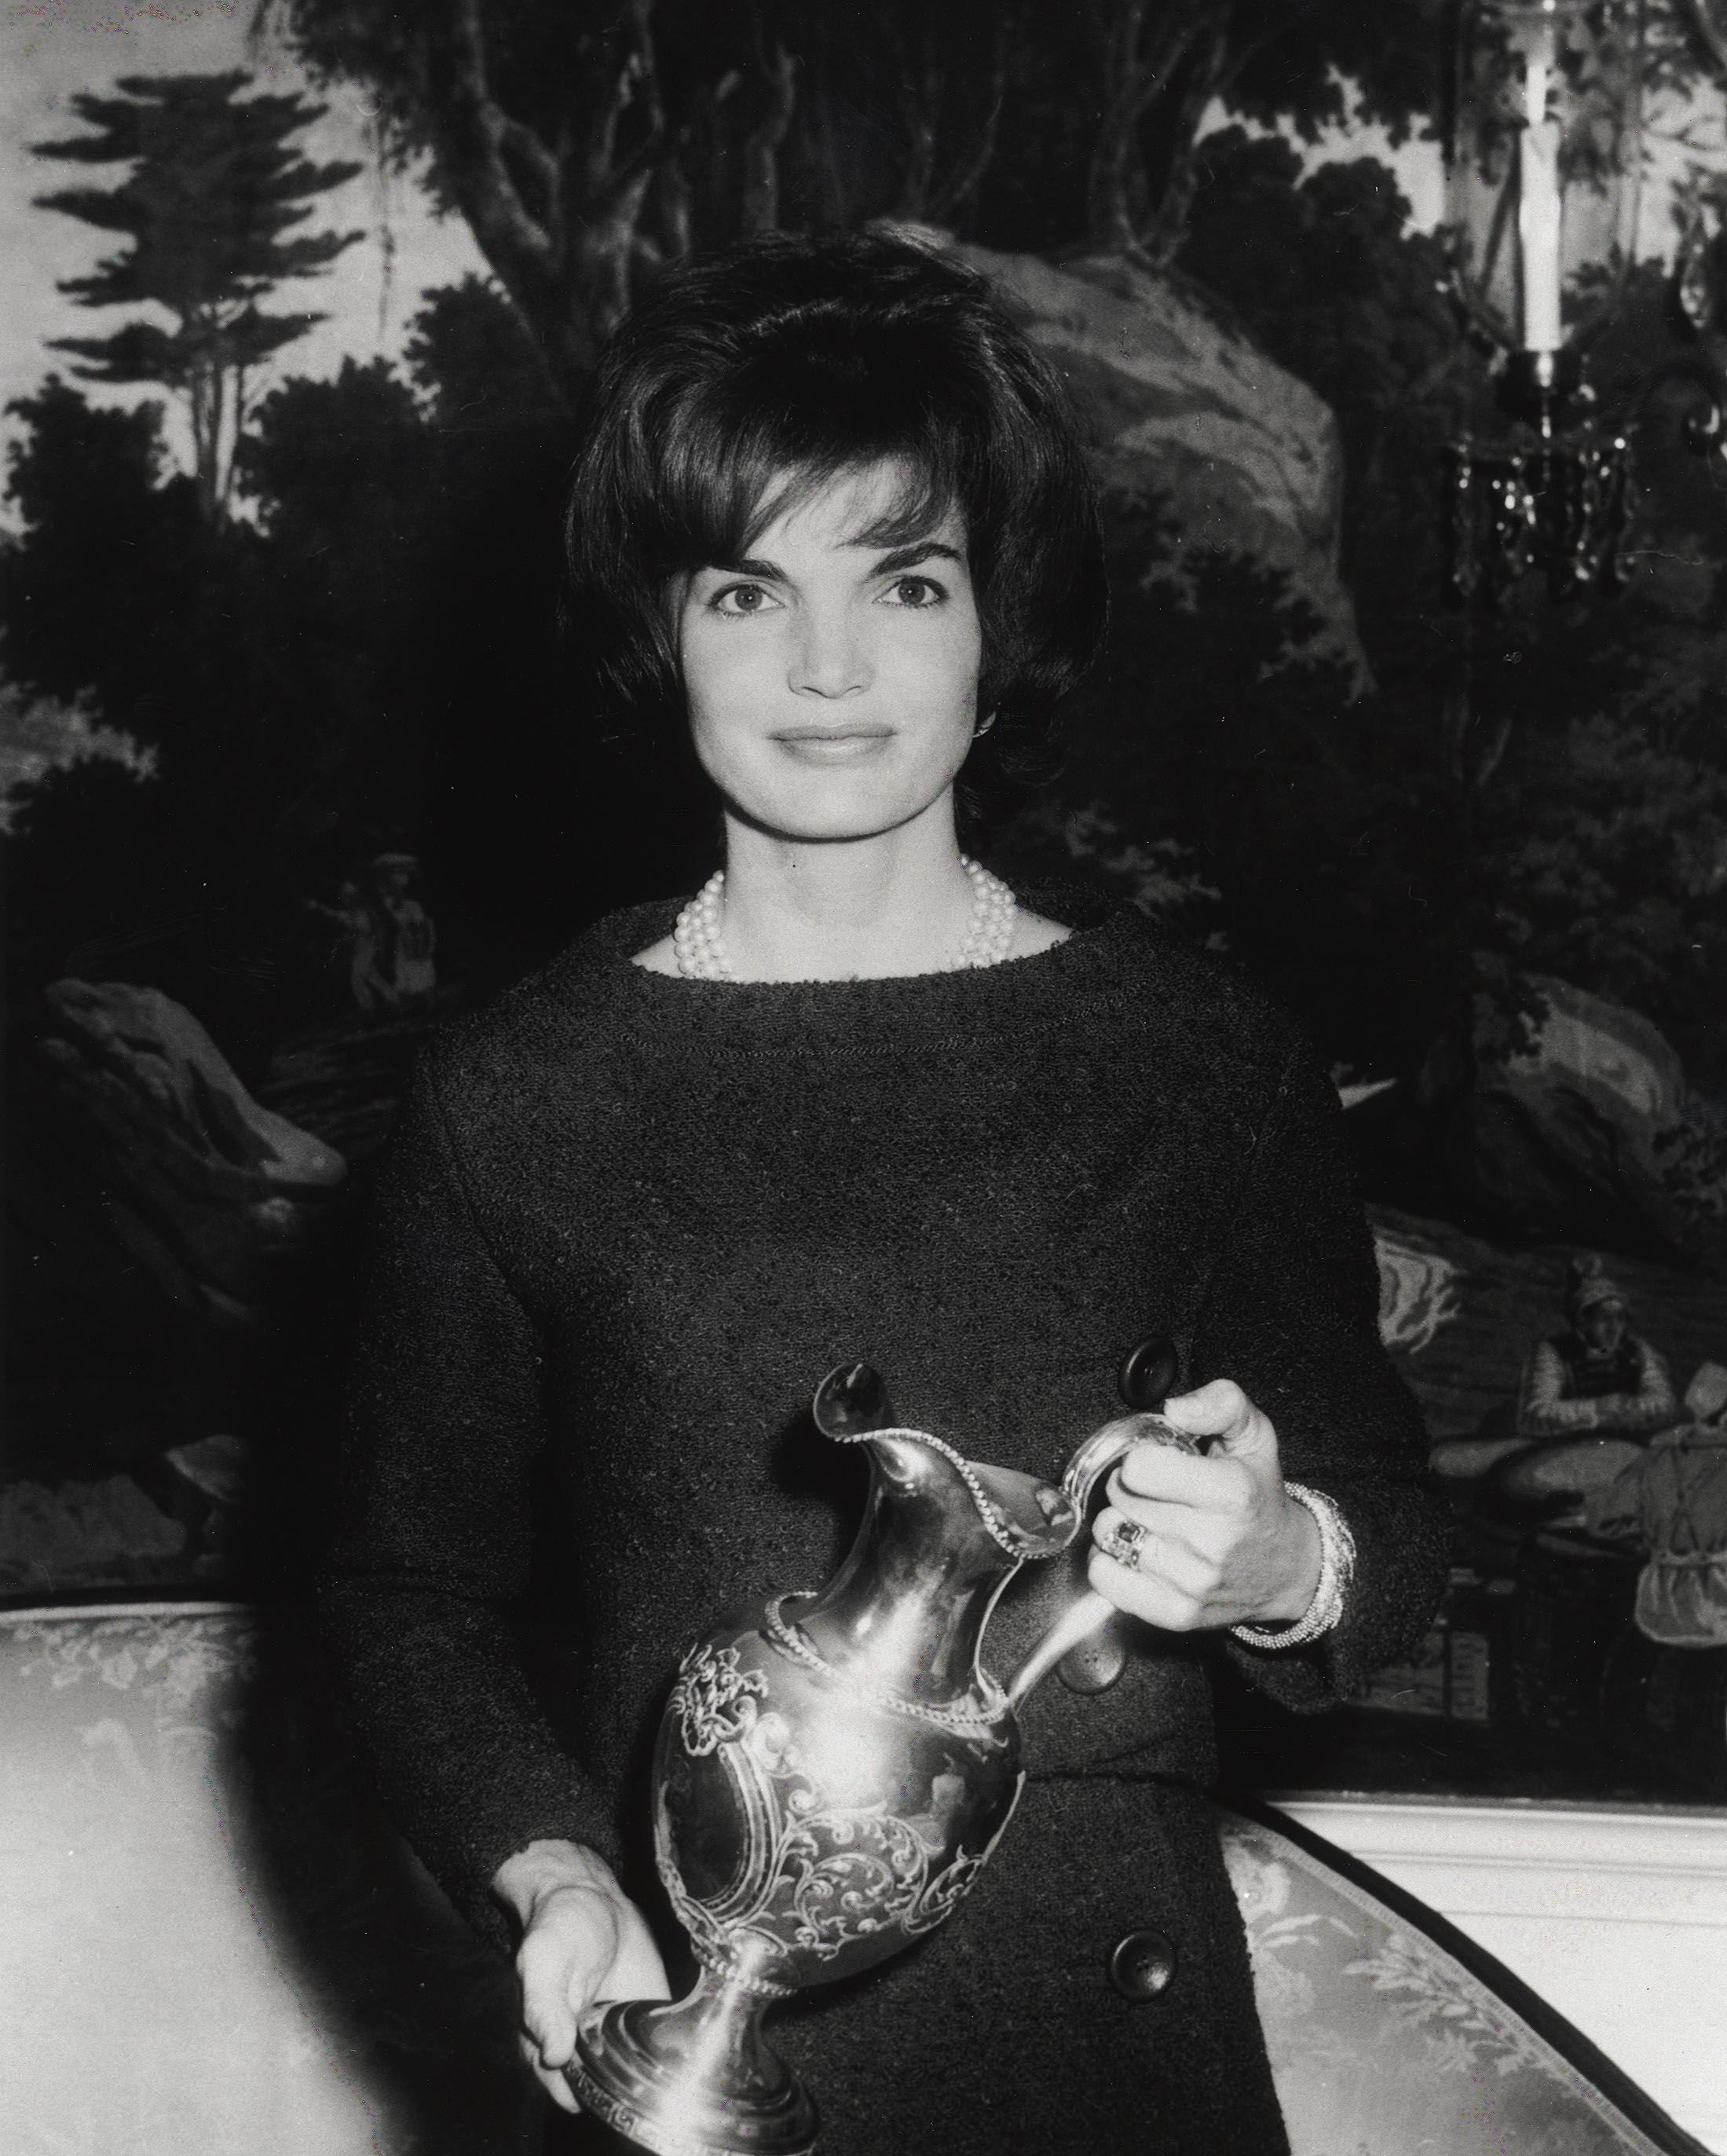 First Lady Jacqueline Kennedy poses for a photograph while holding a gift on December 12, 1961, at the White House in Washington D.C. | Source: Kennedy Library Archives/Newsmakers/Getty Images